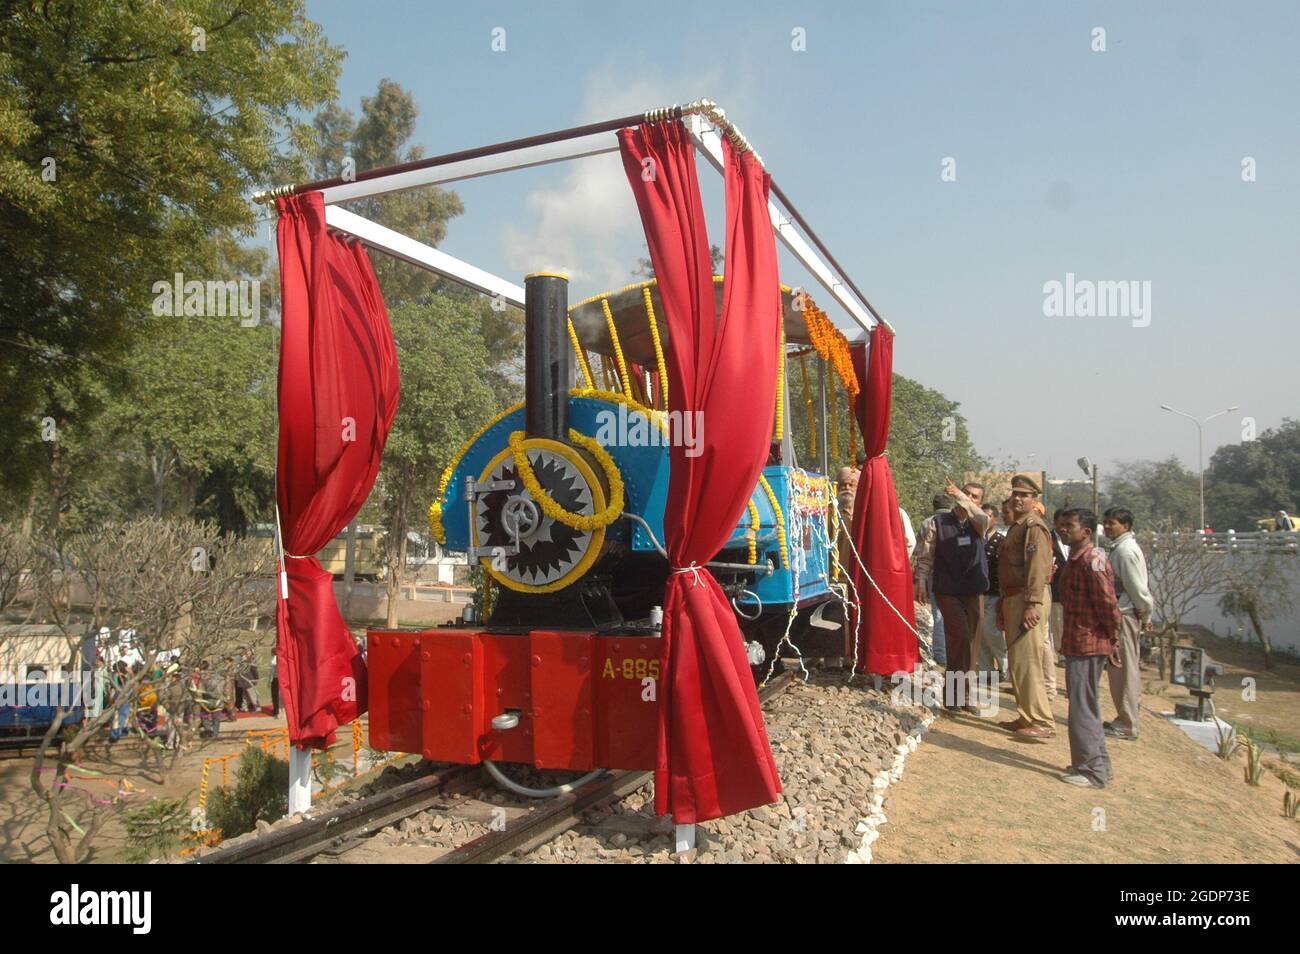 The smallest vintage steam engine of the Indian Railways. It was manufactured by M/S W.G. Bagnall, Stafford, U.K. in the year 1897. Running on small g Stock Photo